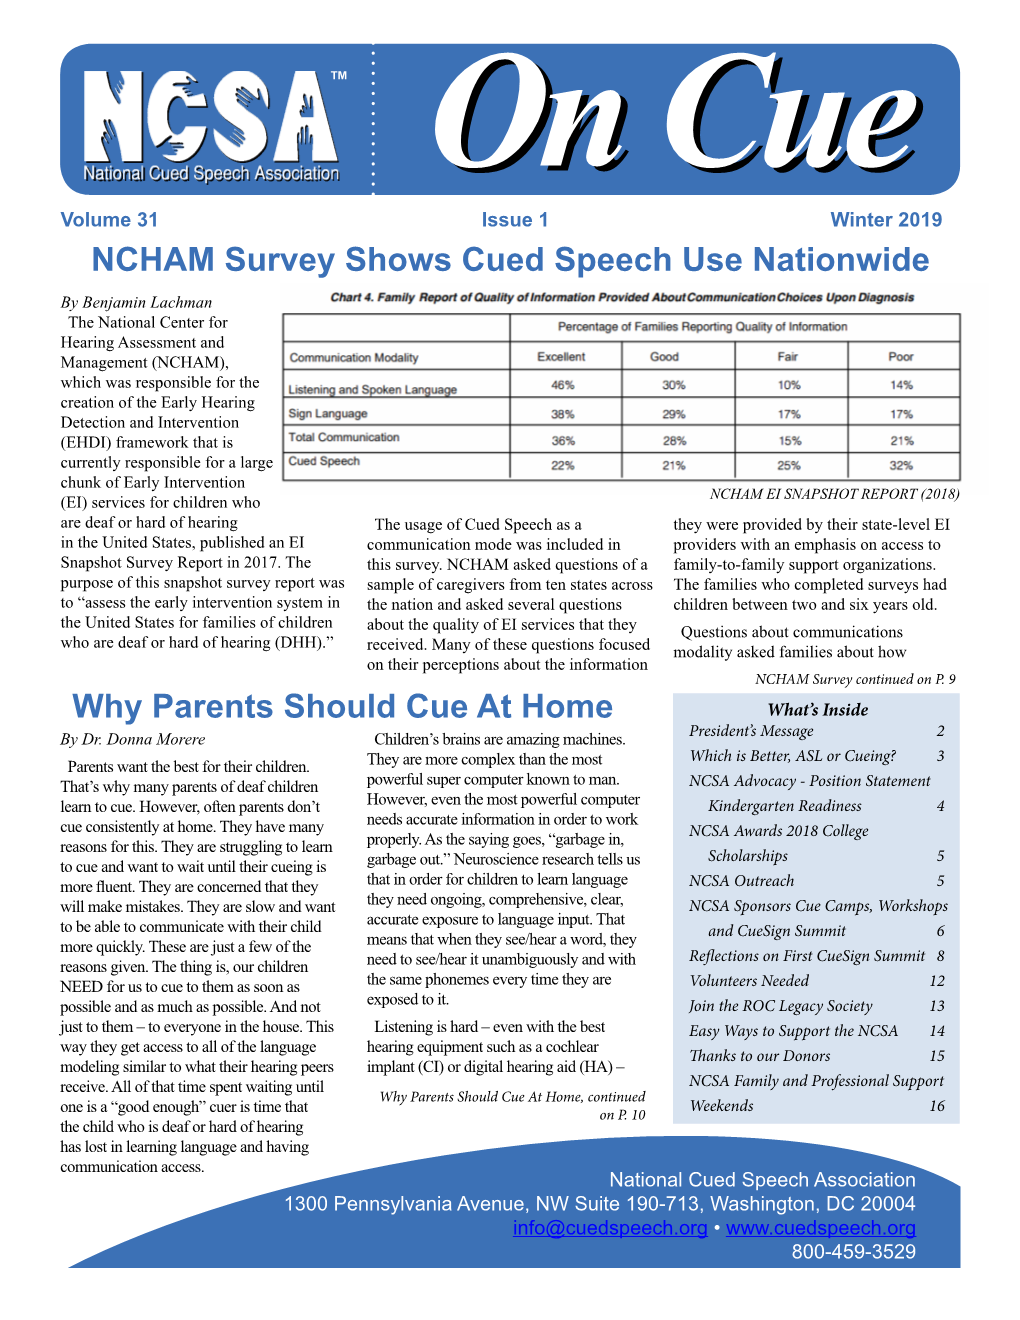 Why Parents Should Cue at Home NCHAM Survey Shows Cued Speech Use Nationwide